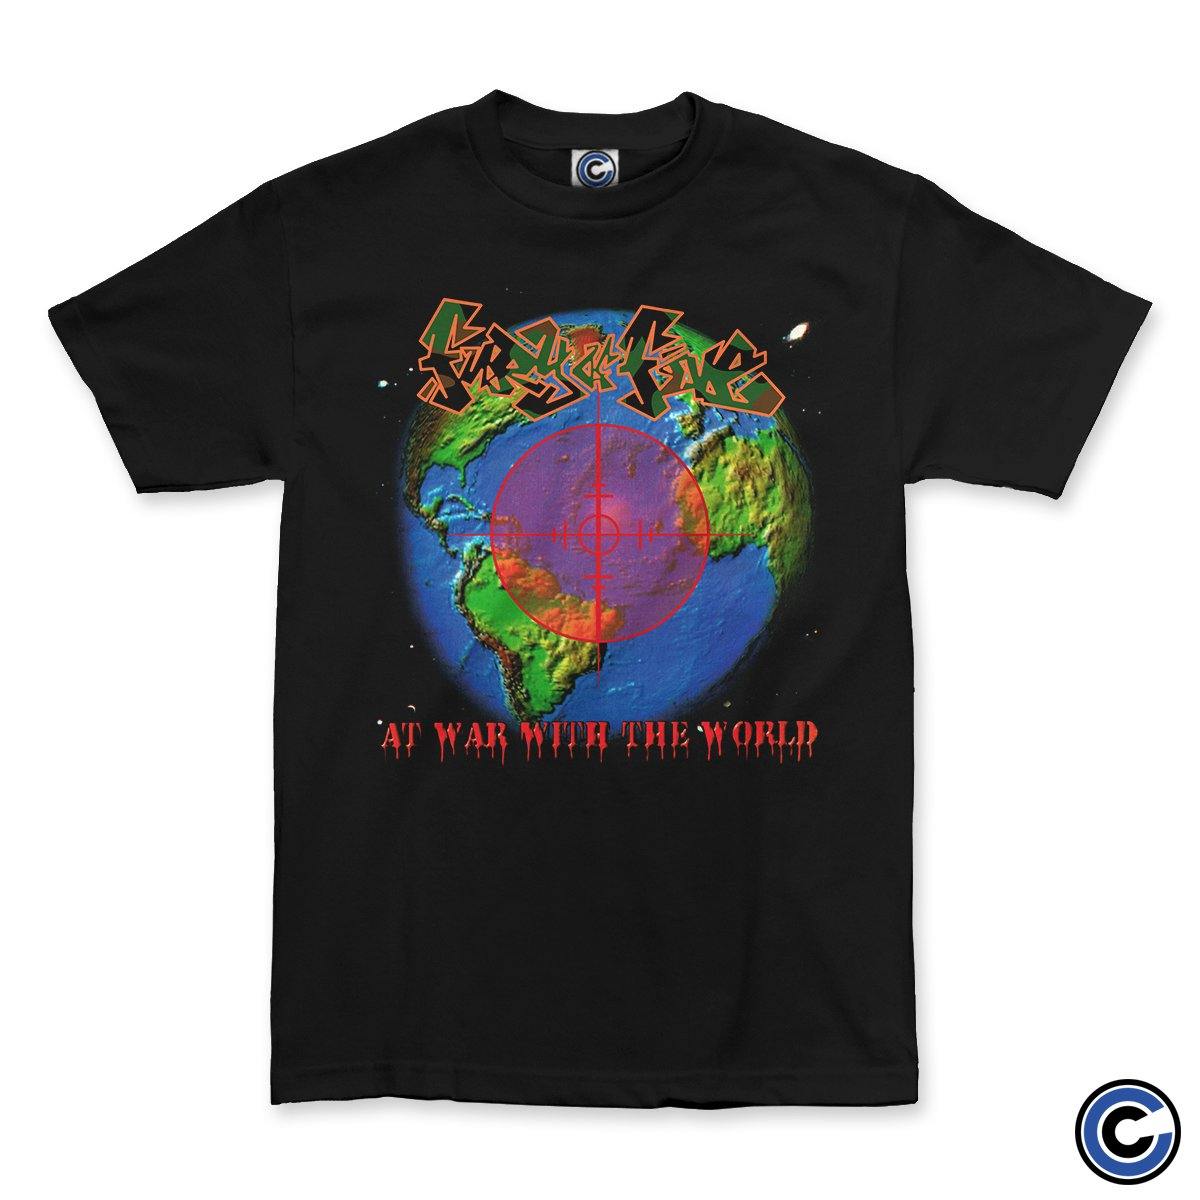 Buy – Fury of Five "At War With The World" Shirt – Band & Music Merch – Cold Cuts Merch